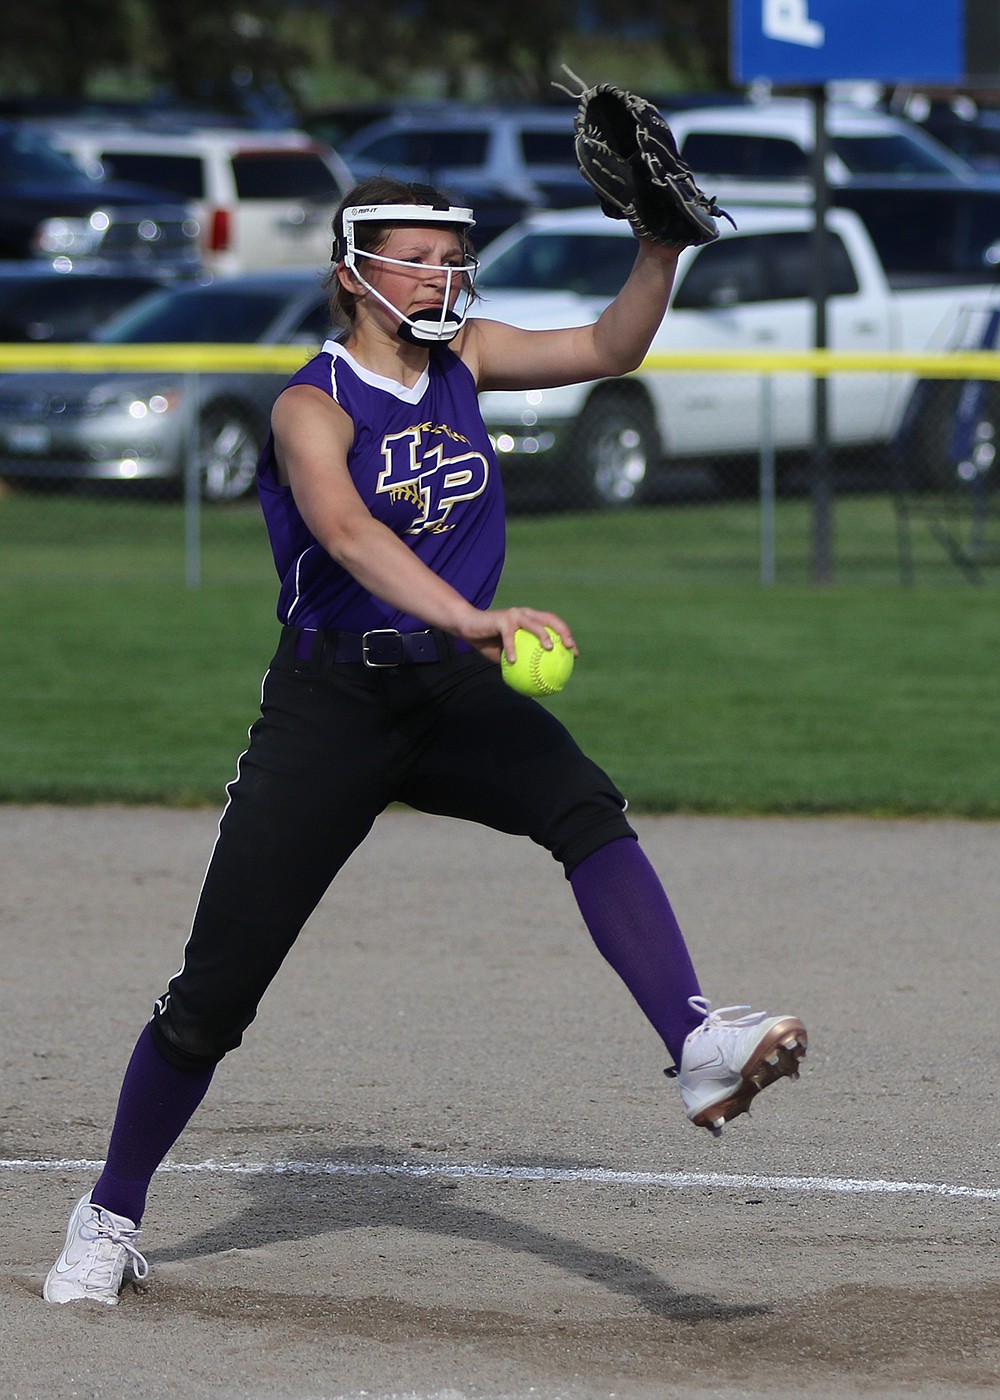 14U Polson Lady Pirate Nikki Kendall plays in a game at the 2020 Emeralds Smash softball tournament in Kalispell June 26-28. (Bob Gunderson photo)